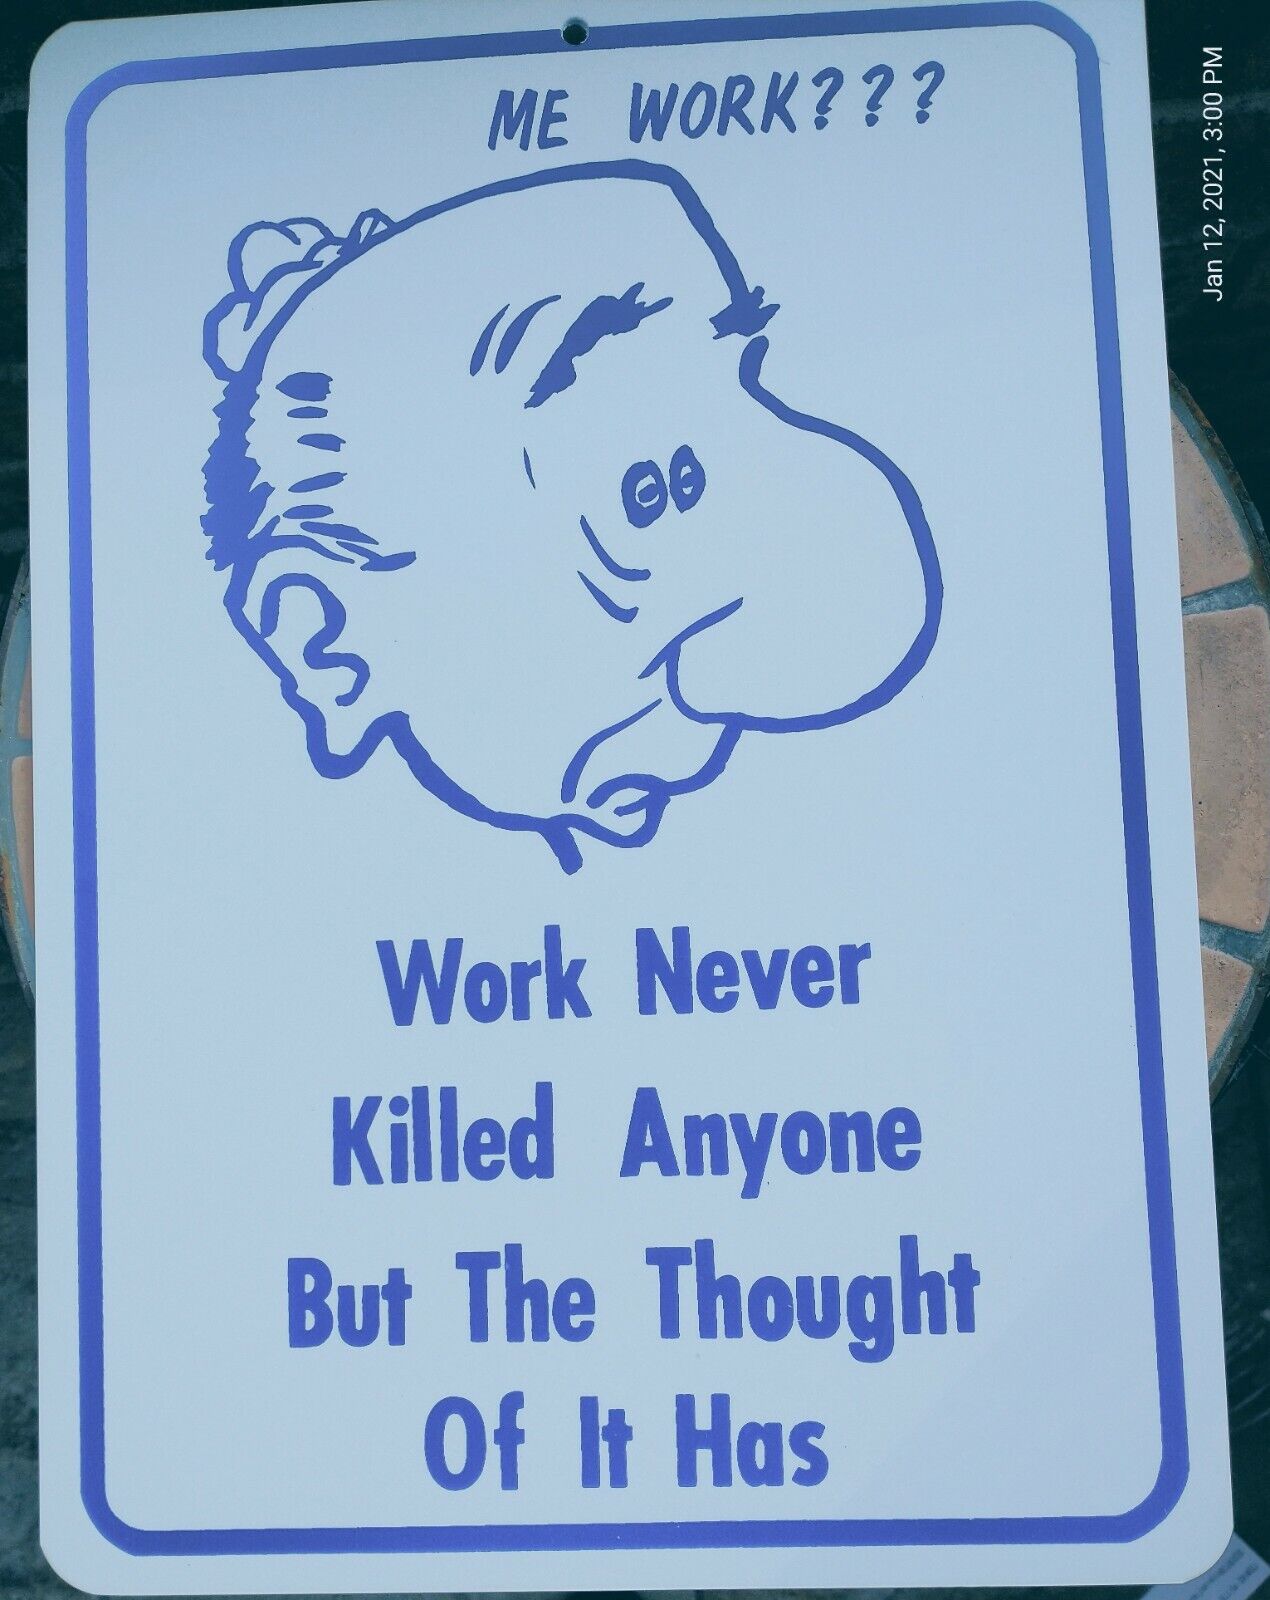 sign humorous funny Work Never killed anyone but the thought of it has